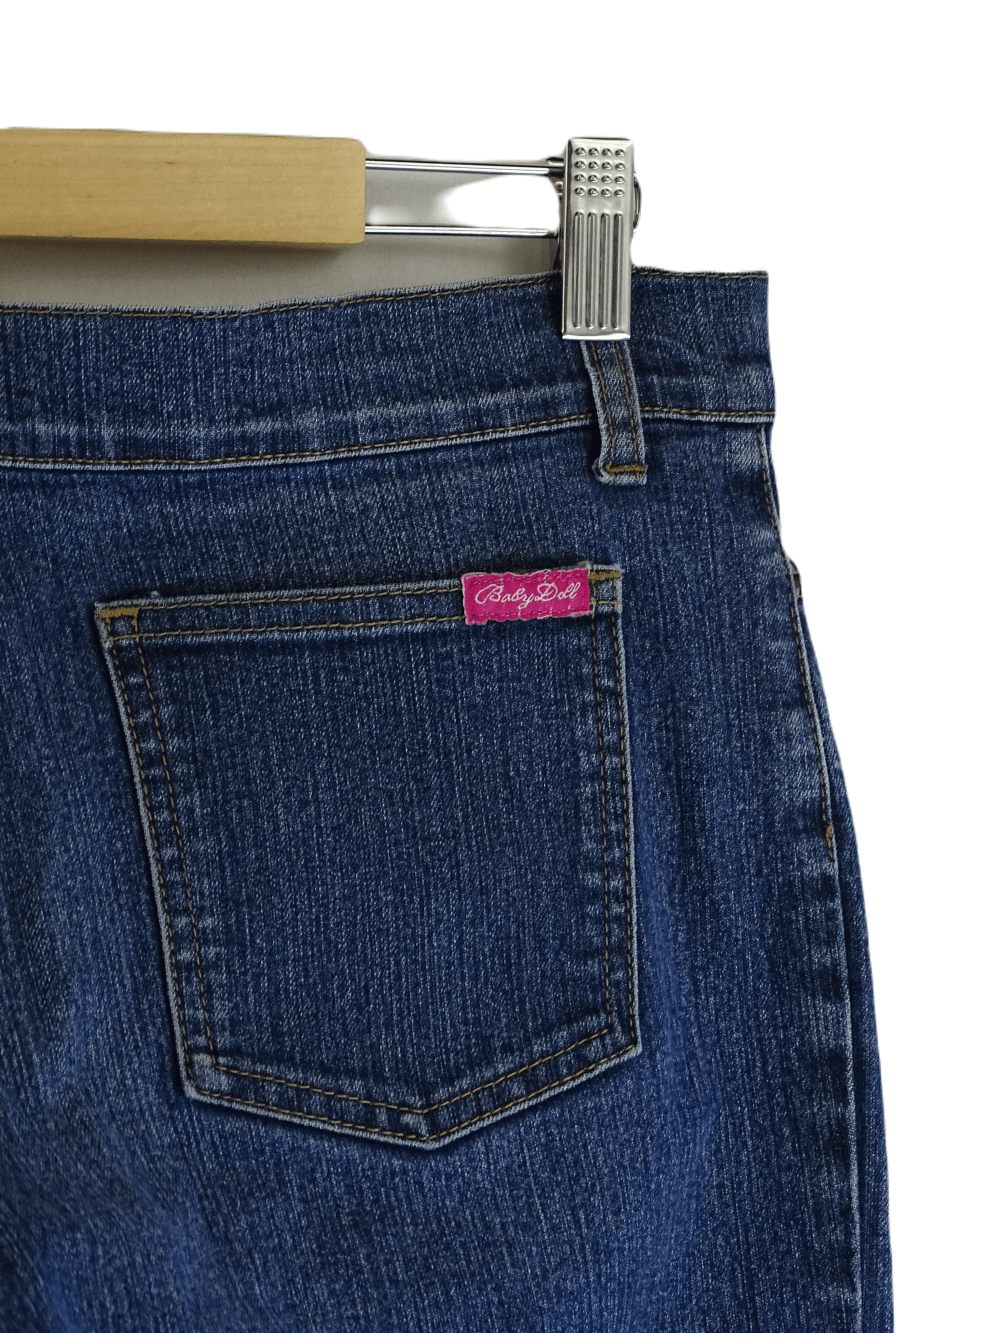 Baby Doll Flared Blue Jeans 14